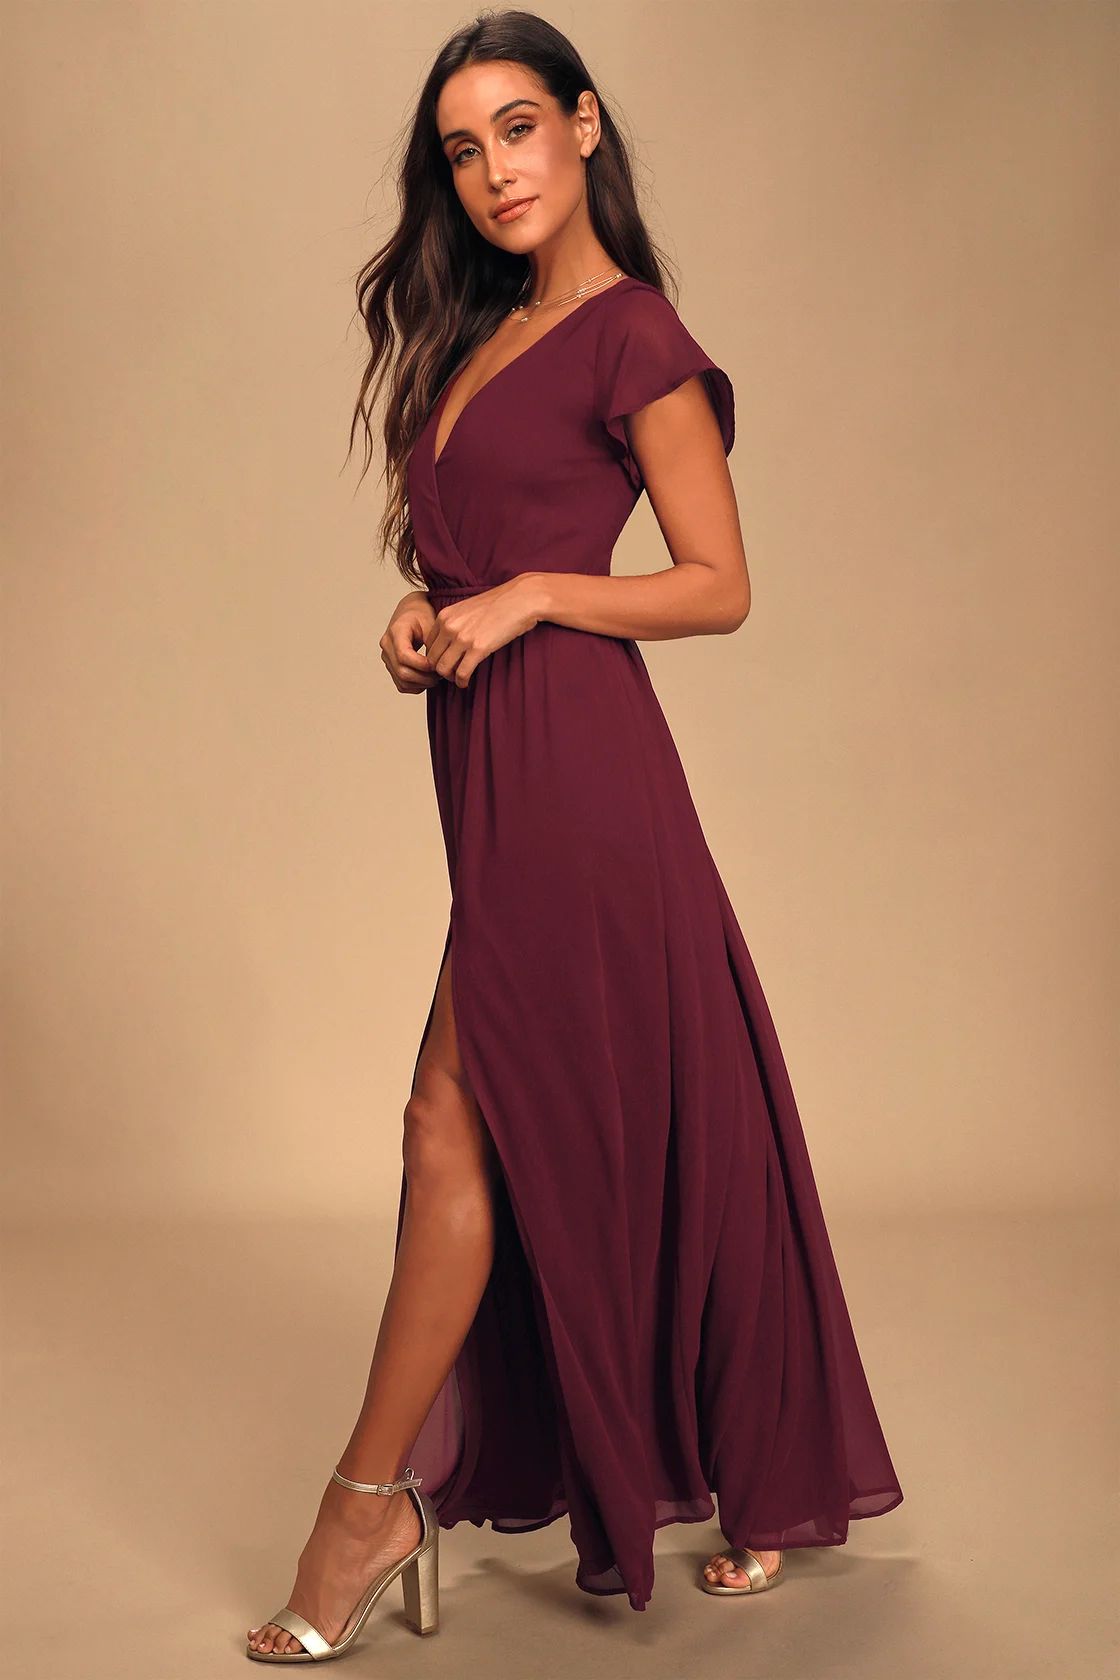 Lost in the Moment Burgundy Maxi Dress | Lulus (US)